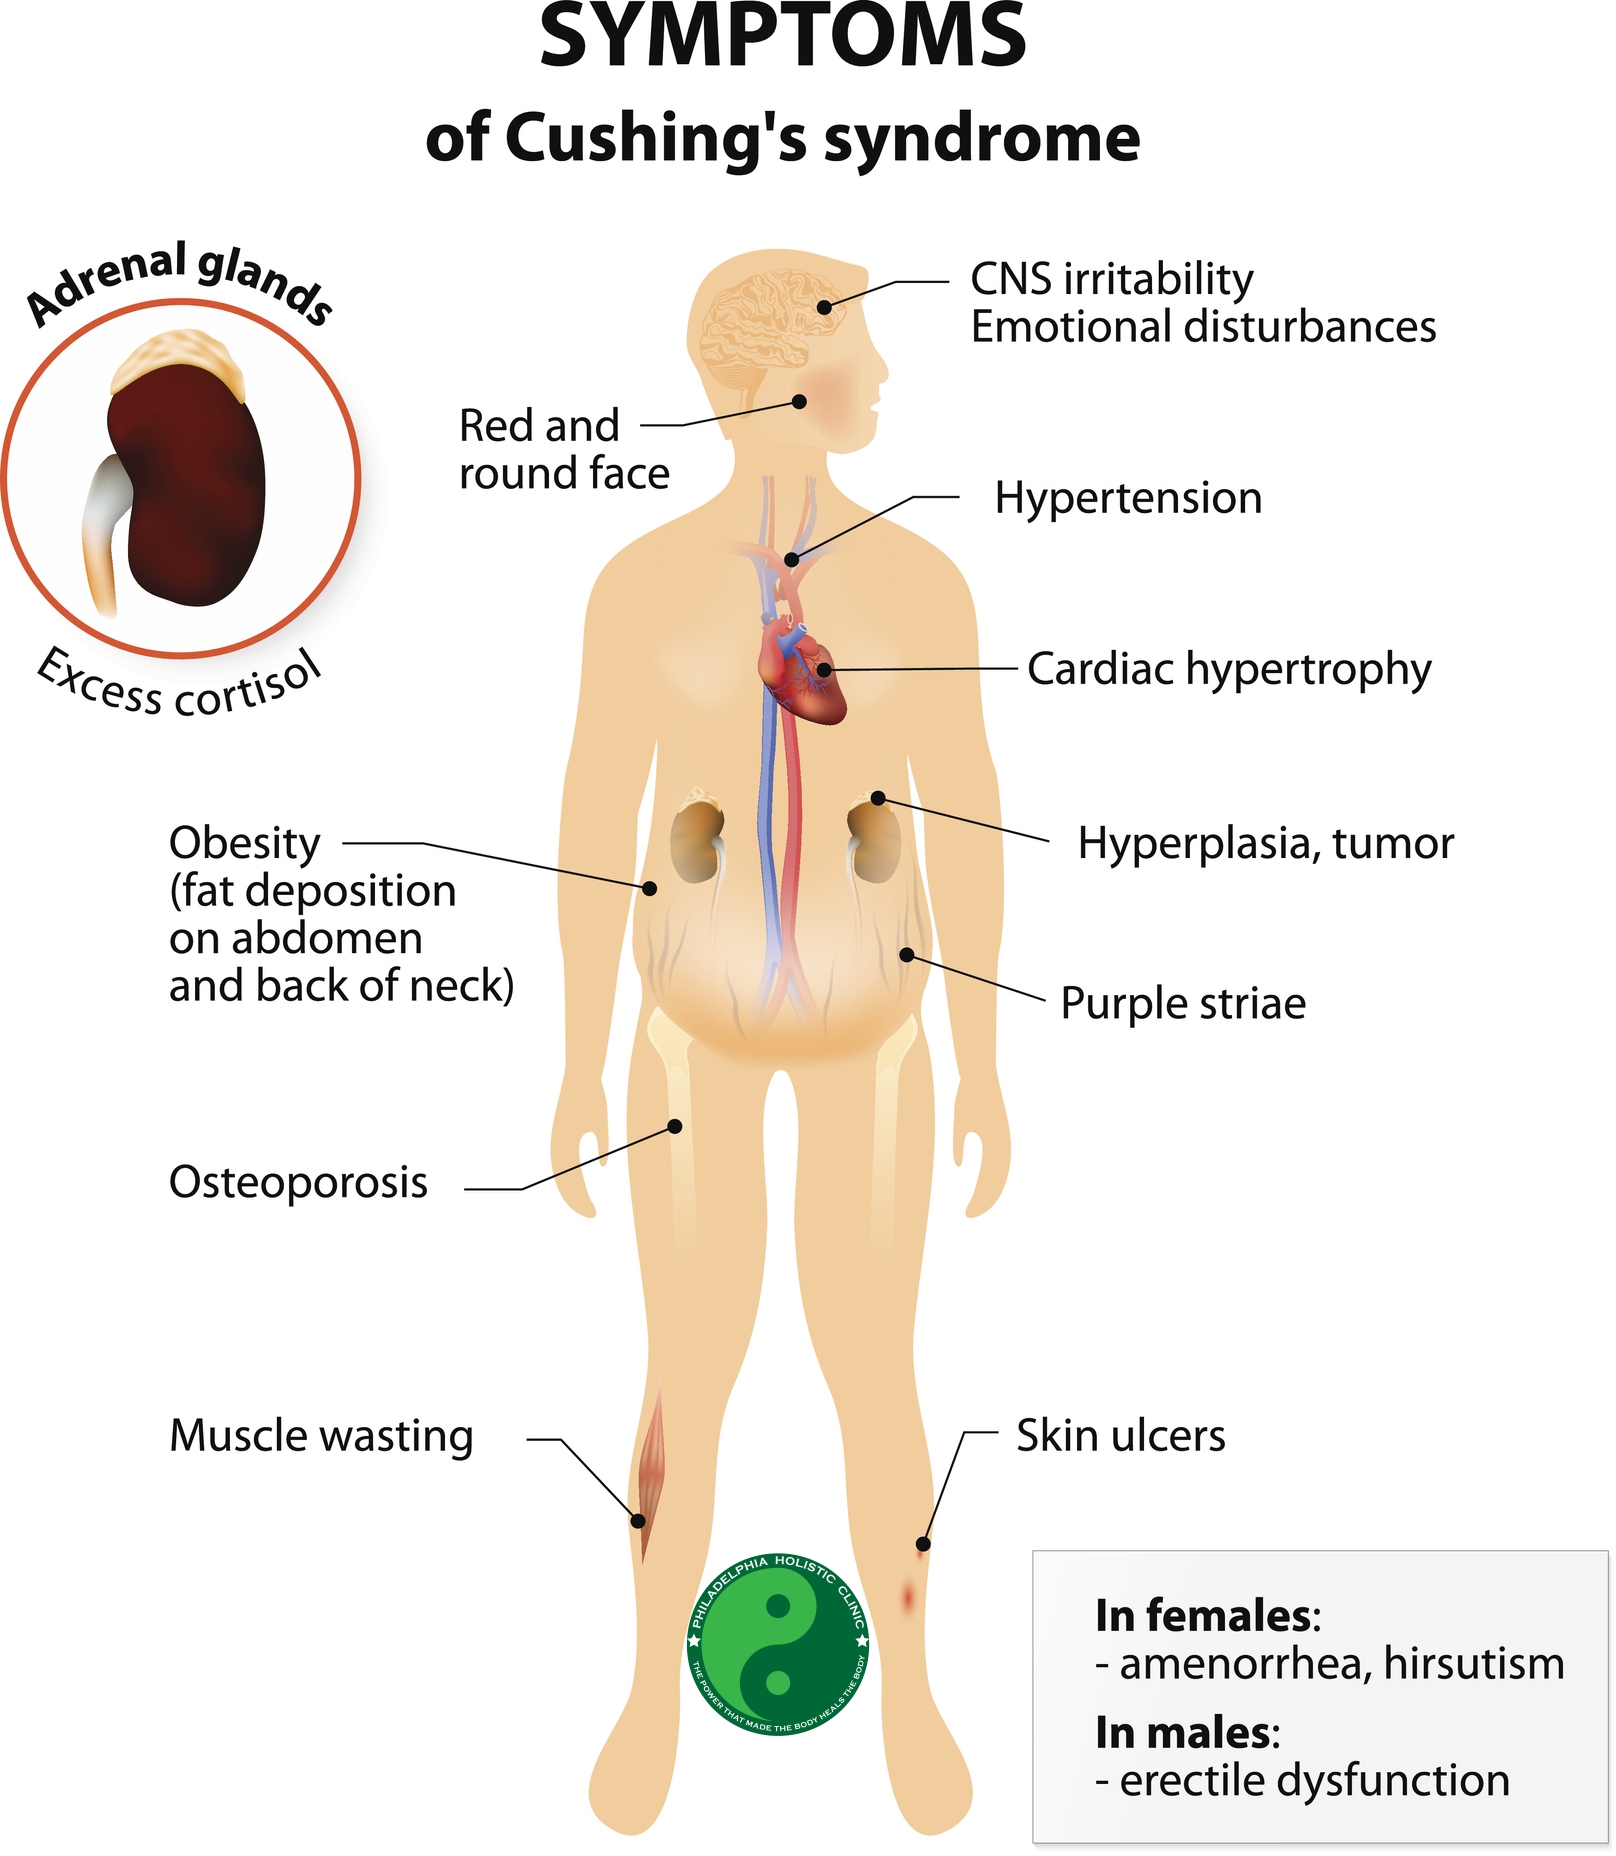 Symptoms and treatment of Cushing's syndrome